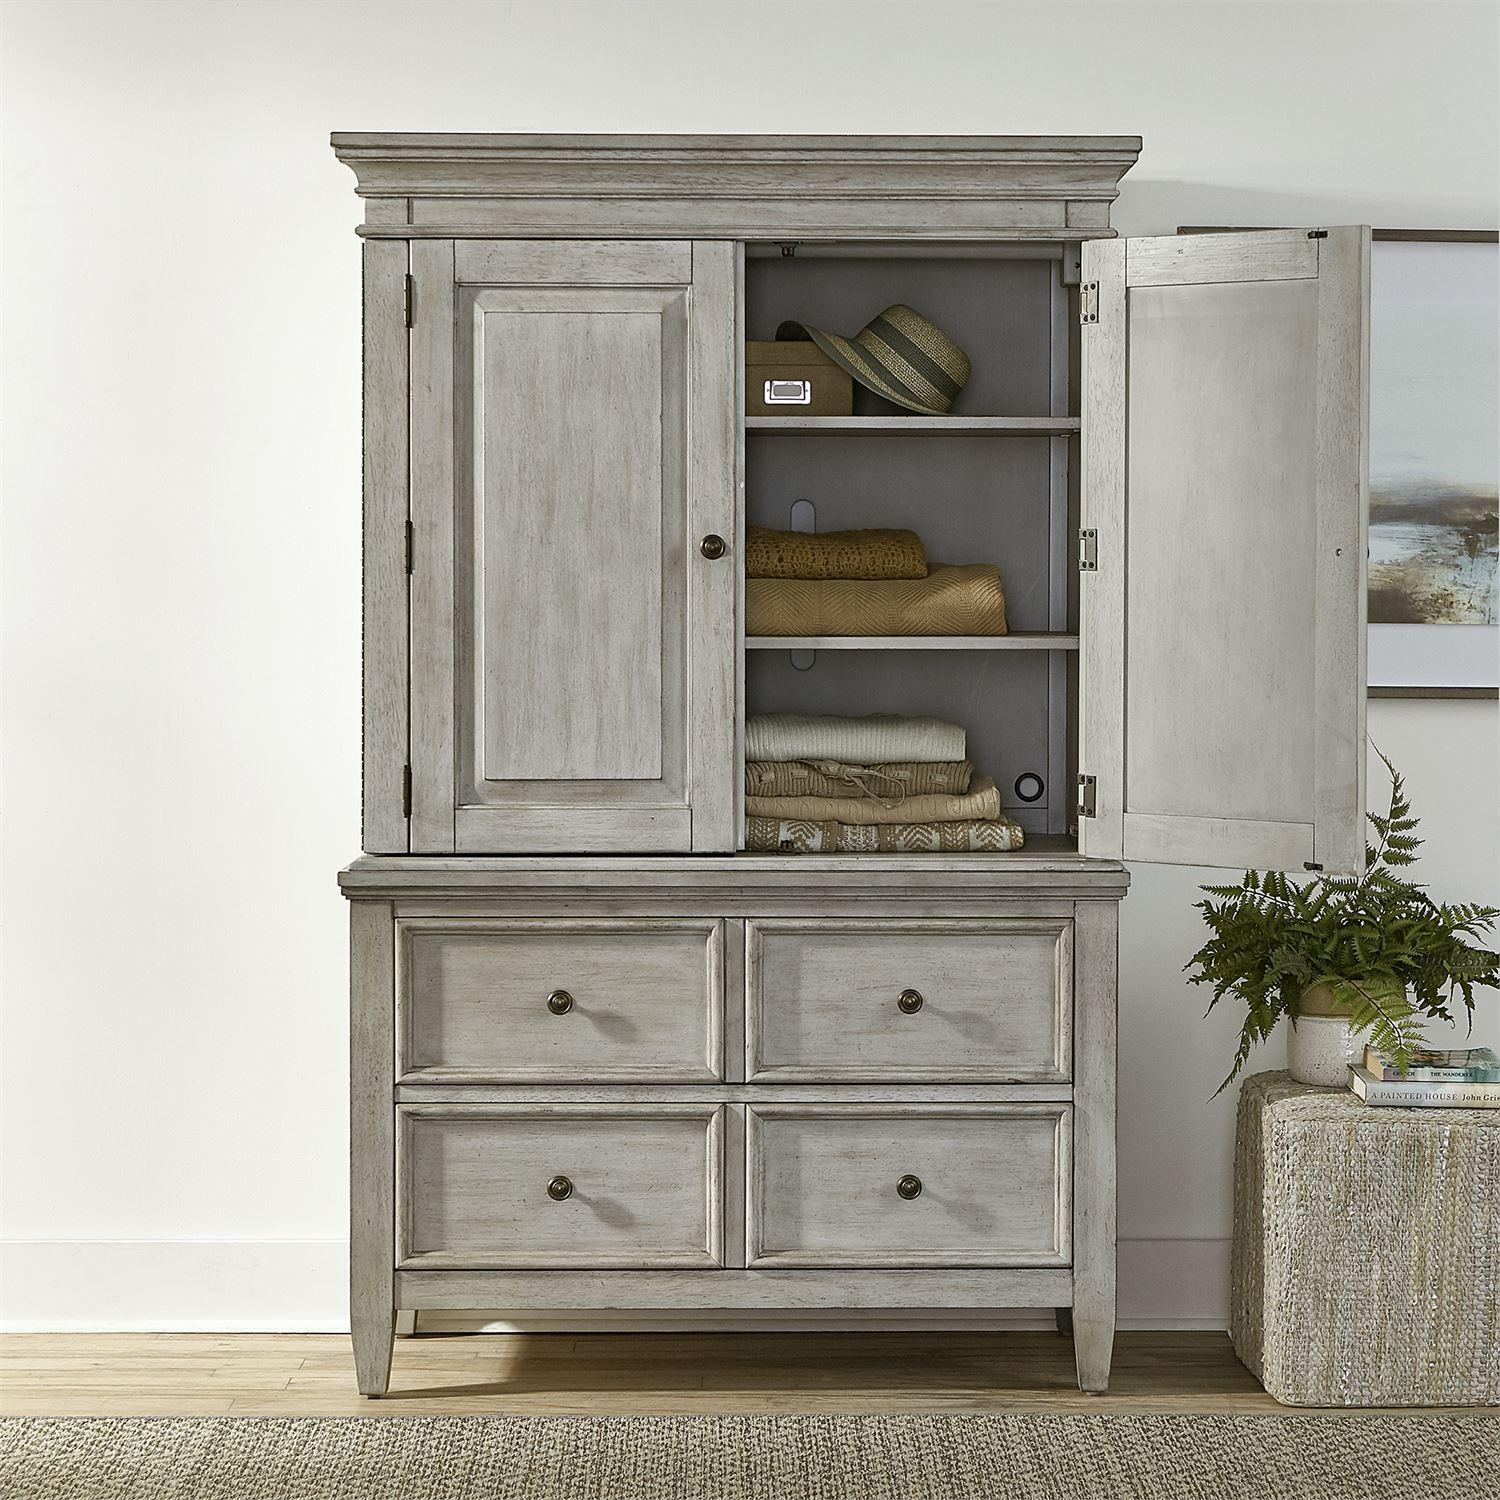 

    
824-BR-ARM Antique White Finish Wood Armoire Heartland (824-BR) Liberty Furniture
